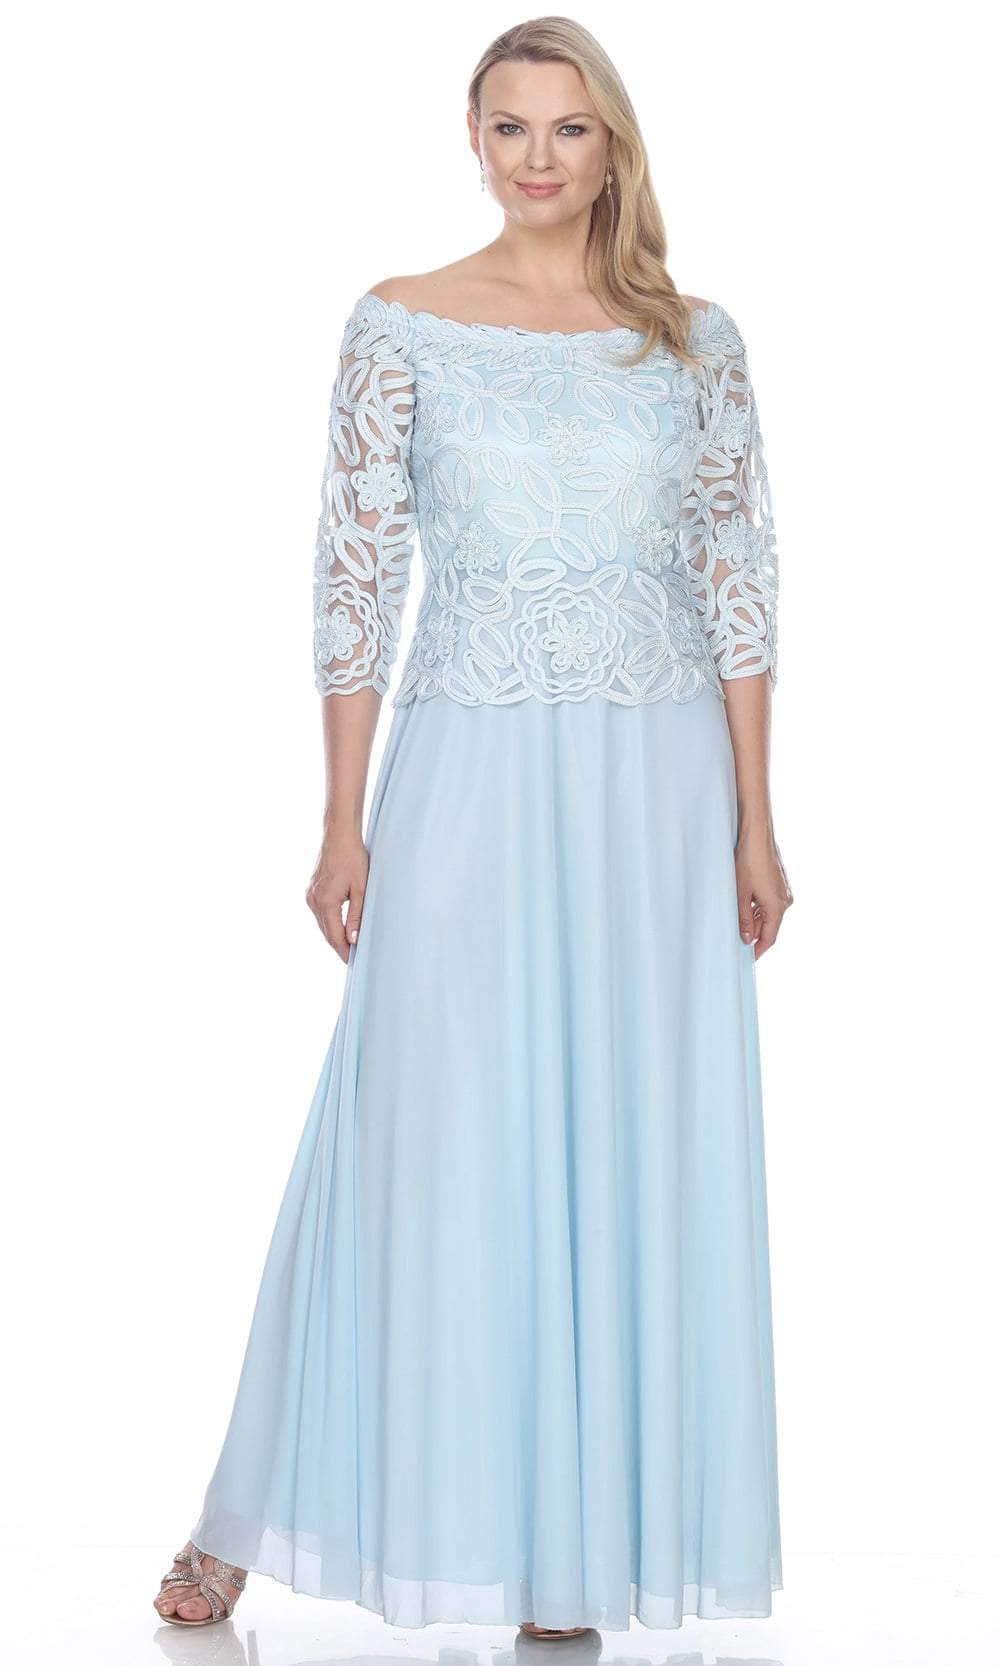 Soulmates 1614 - Off Shoulder 3/4 Sleeve Evening Gown